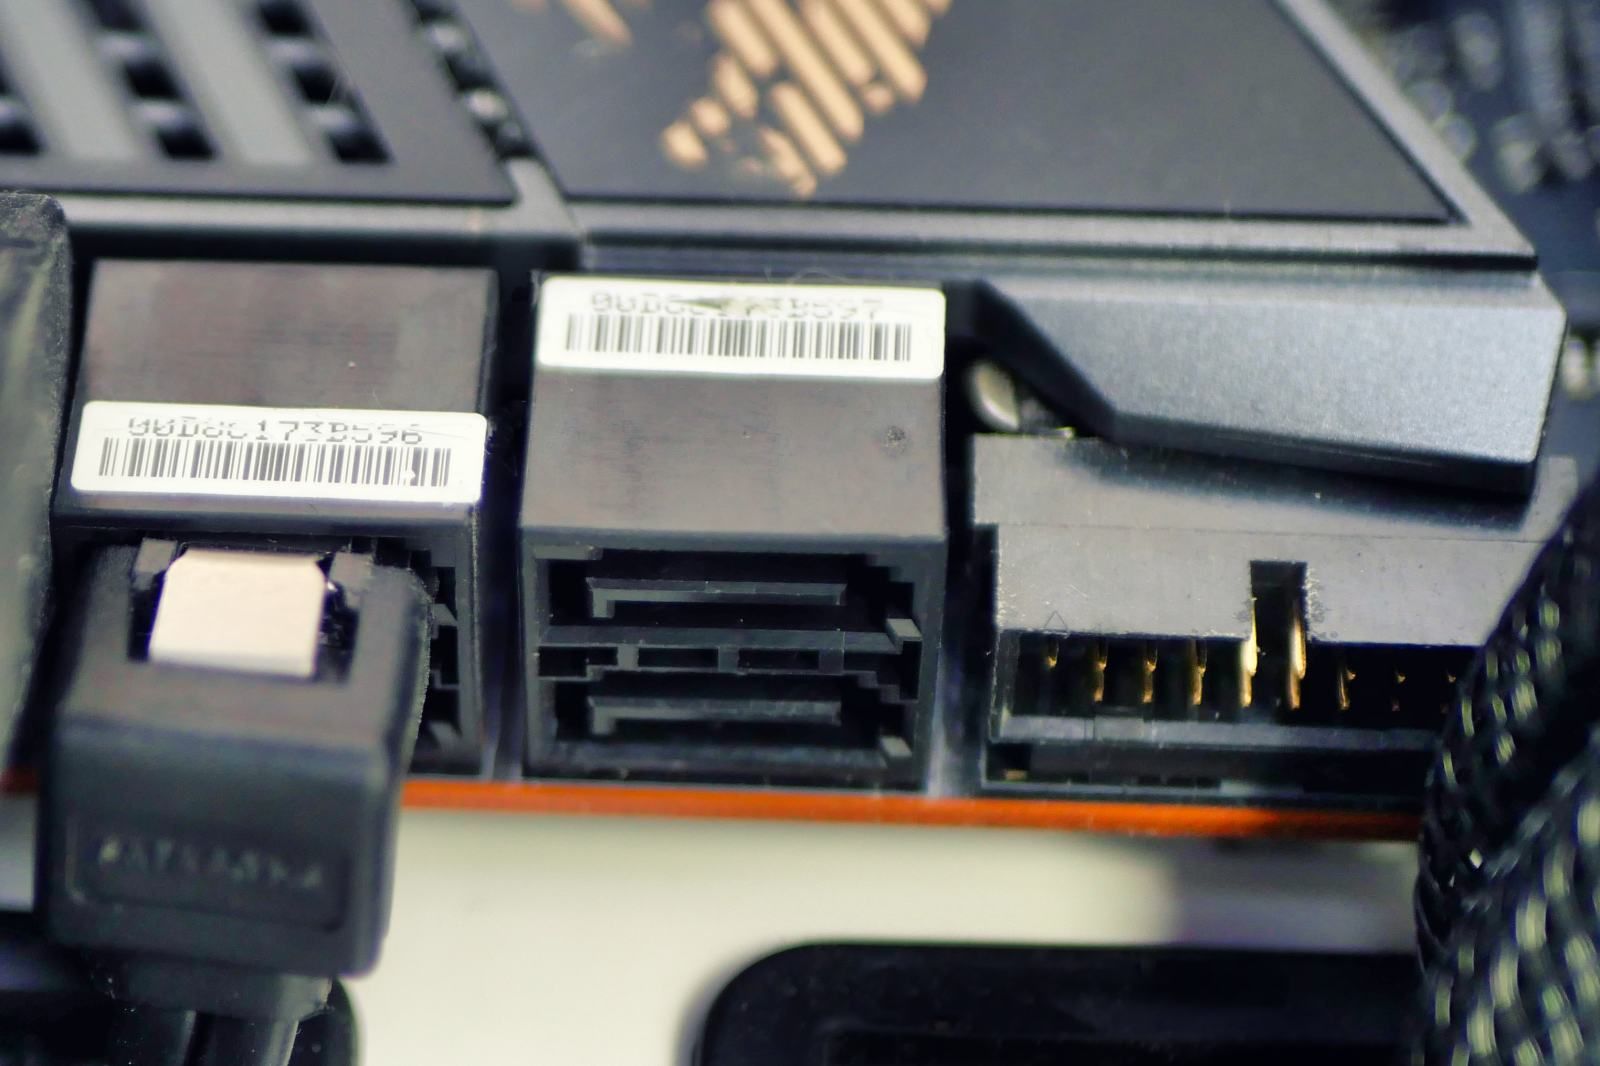 How to install an SSD in a gaming PC photo 15